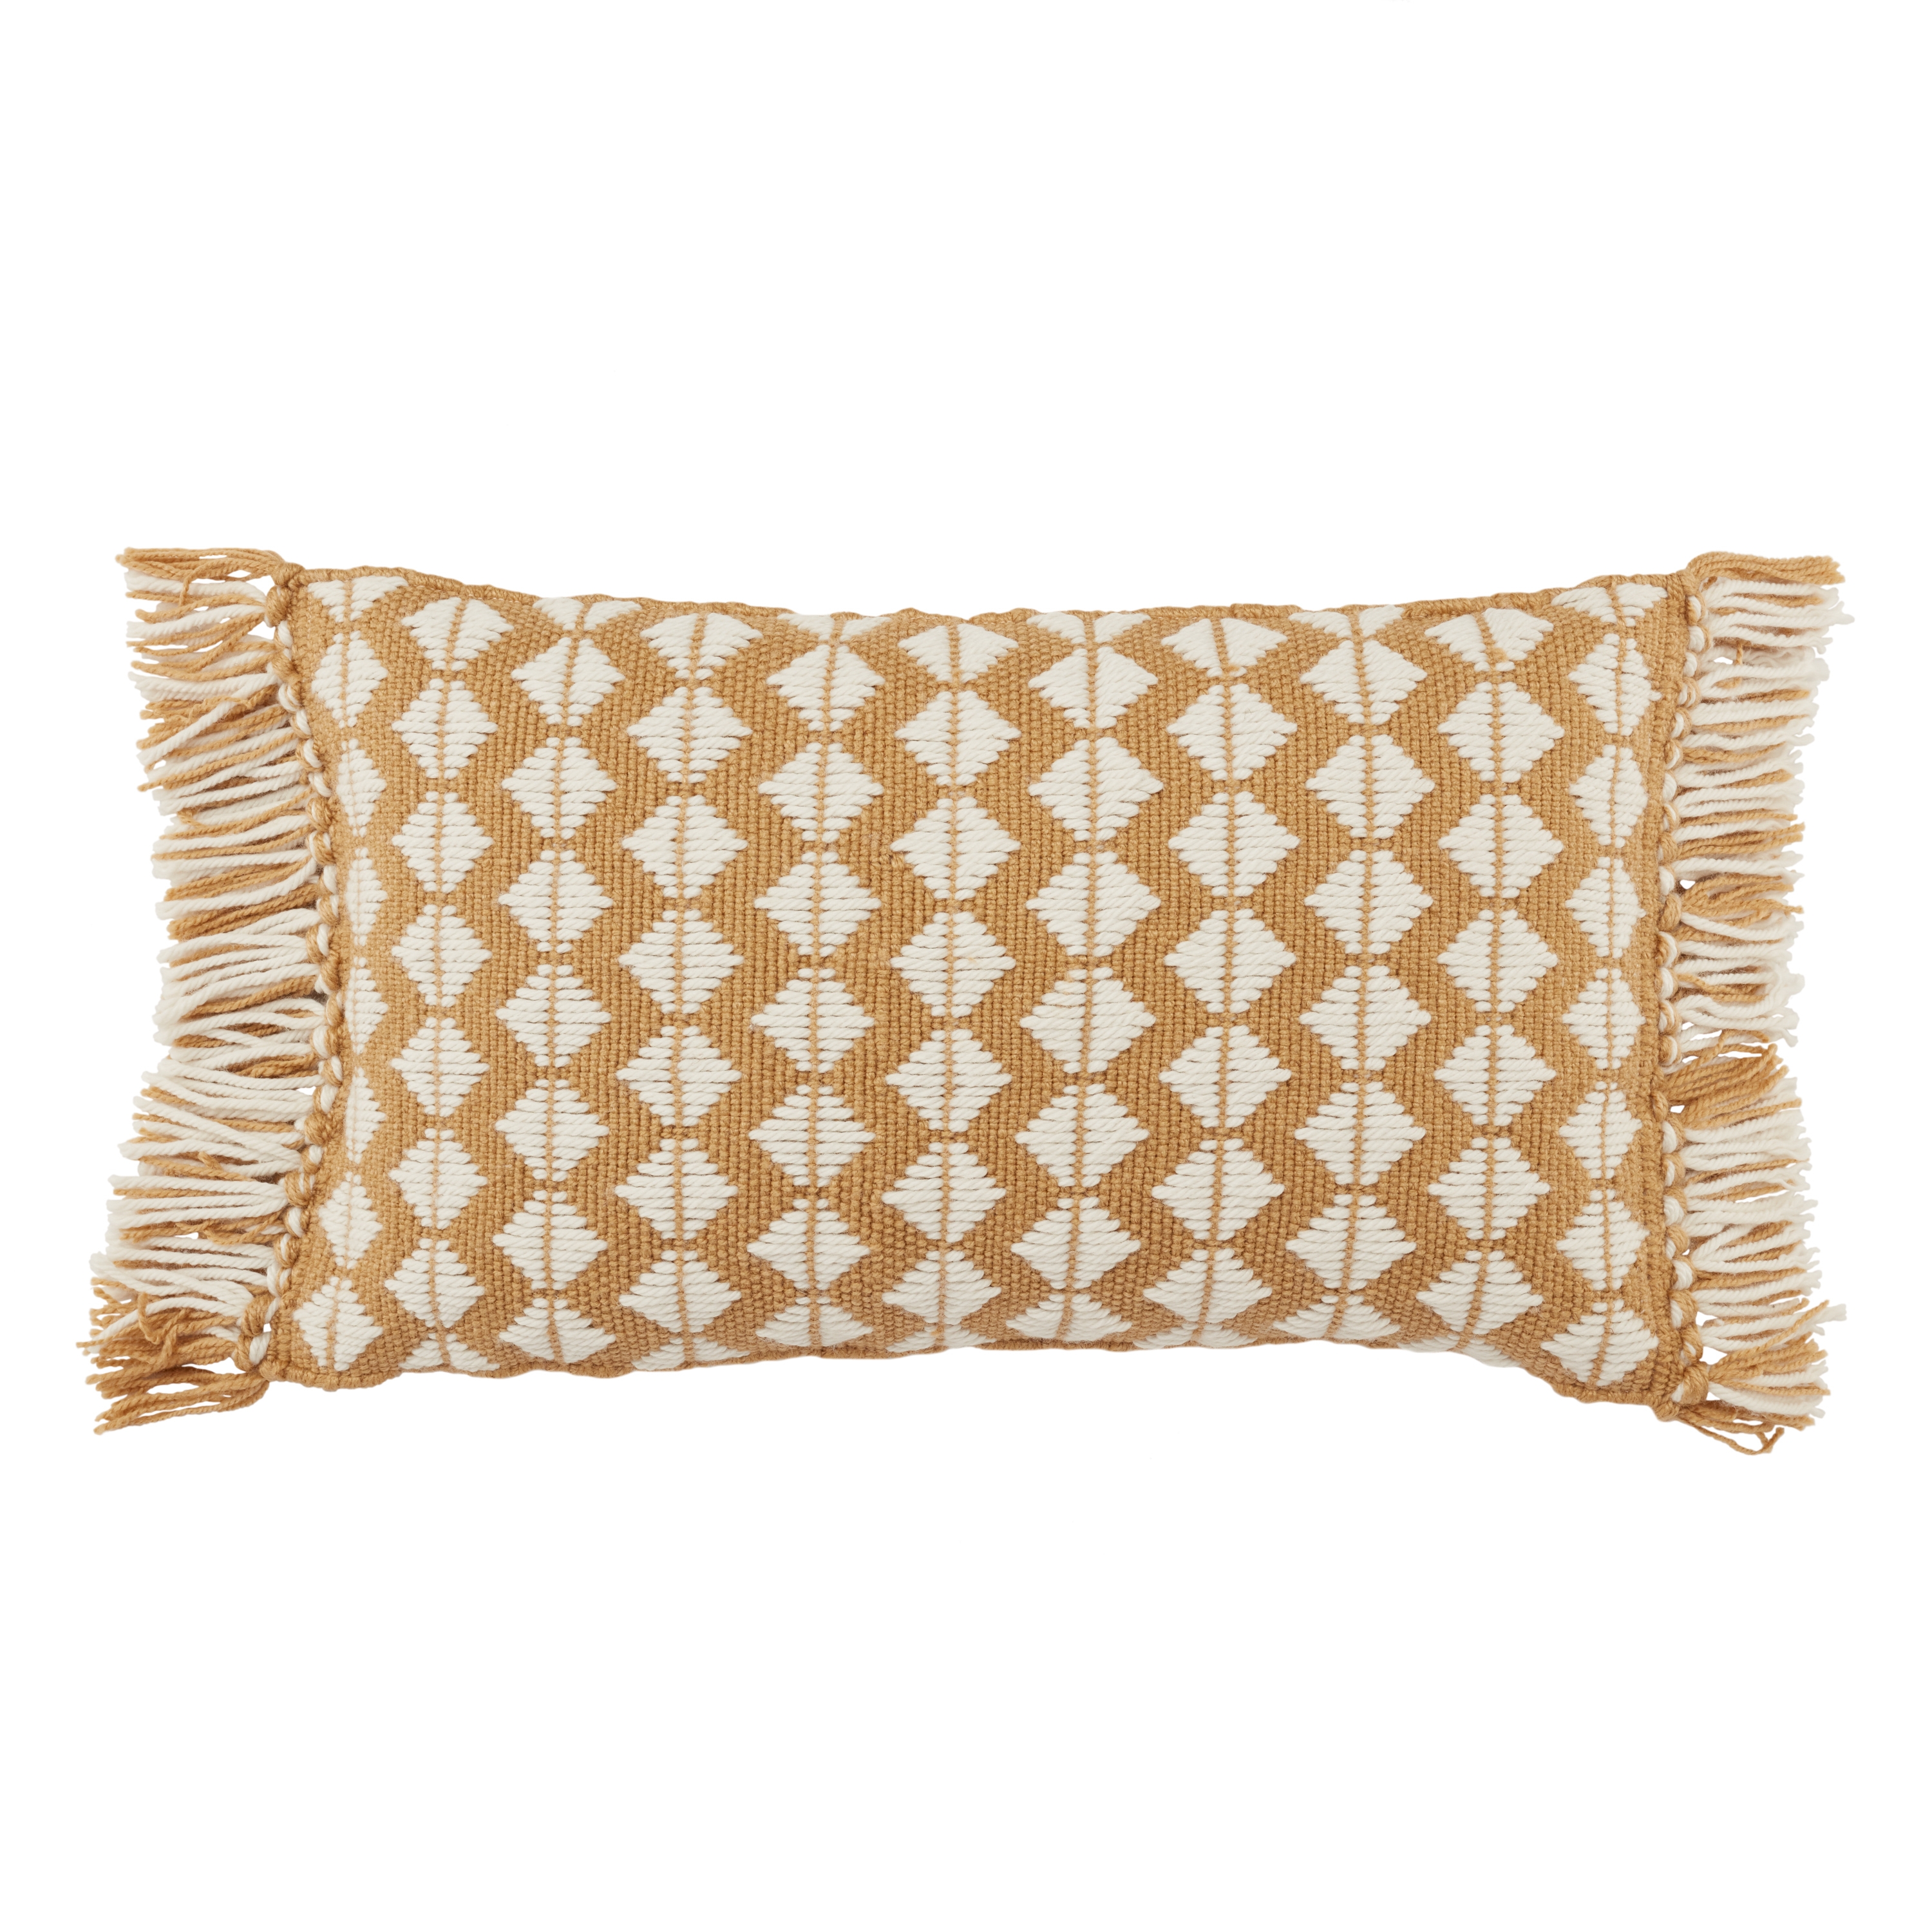 Chesa Lumbar Pillow, Gold, 21" x 13" (Cover Only) - Image 0